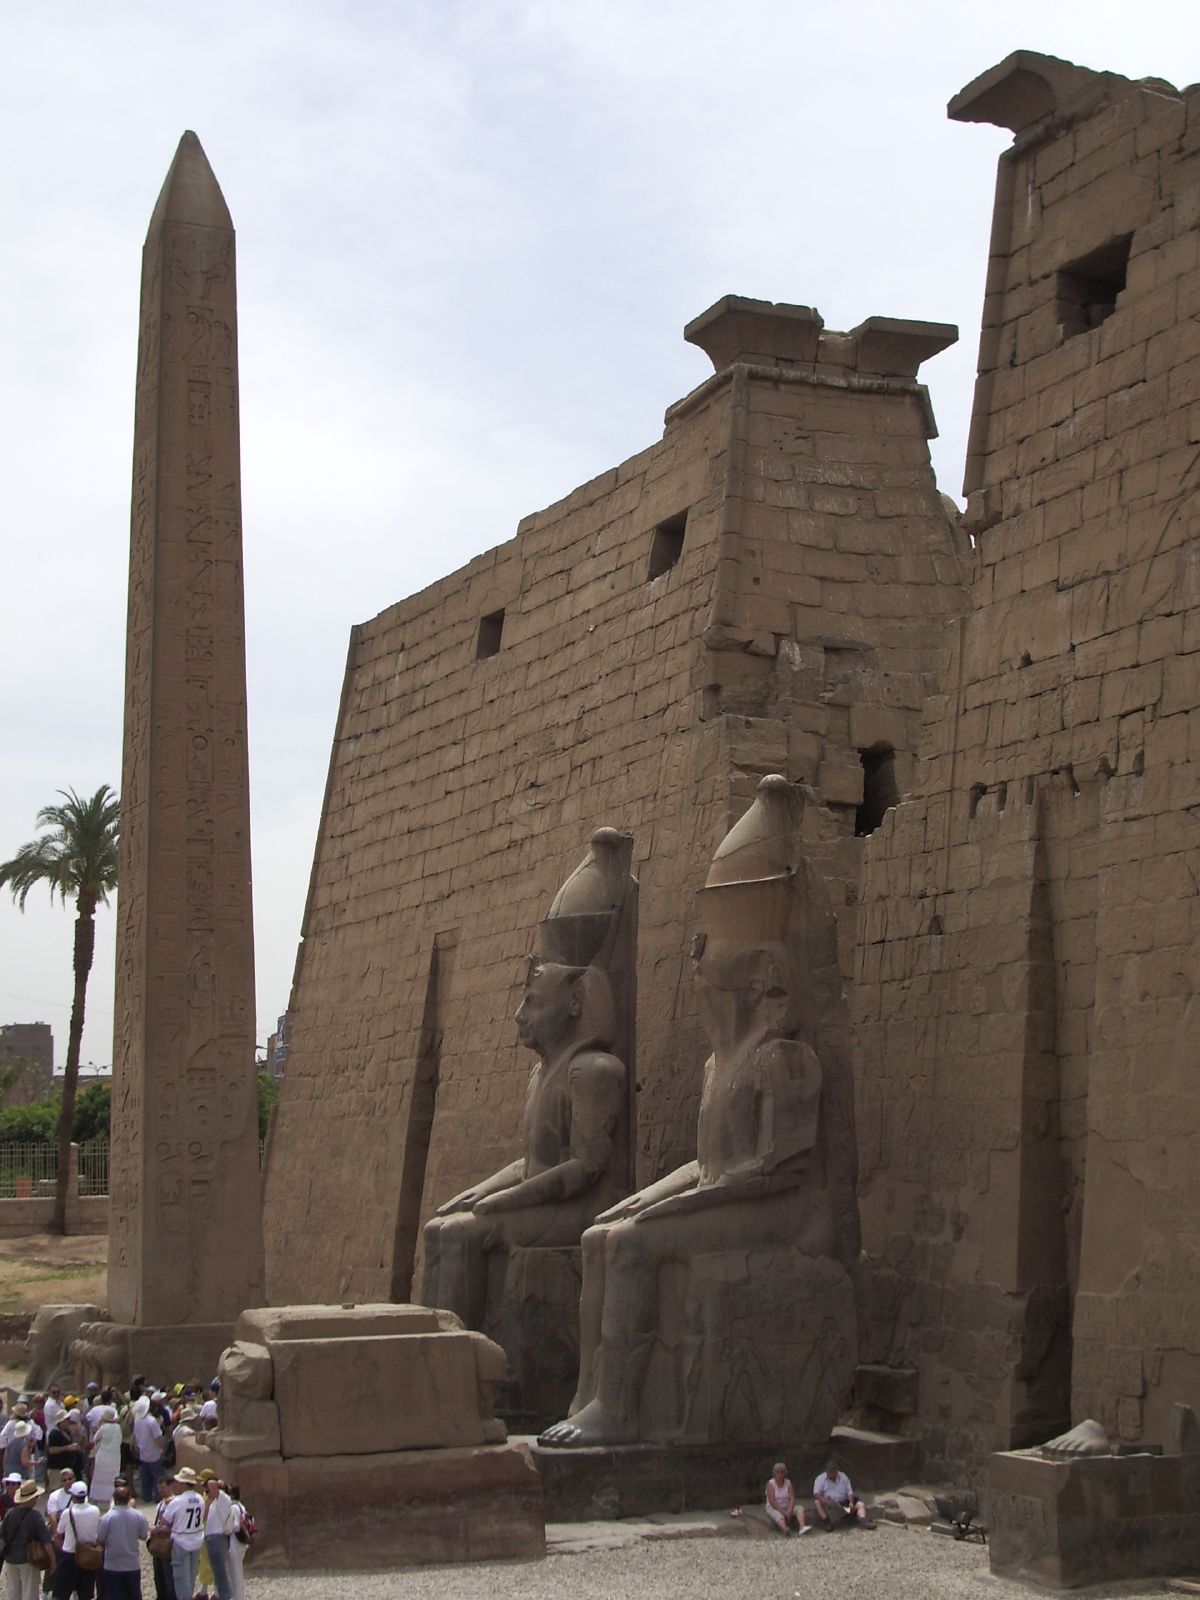 a couple of very tall ancient buildings with statues